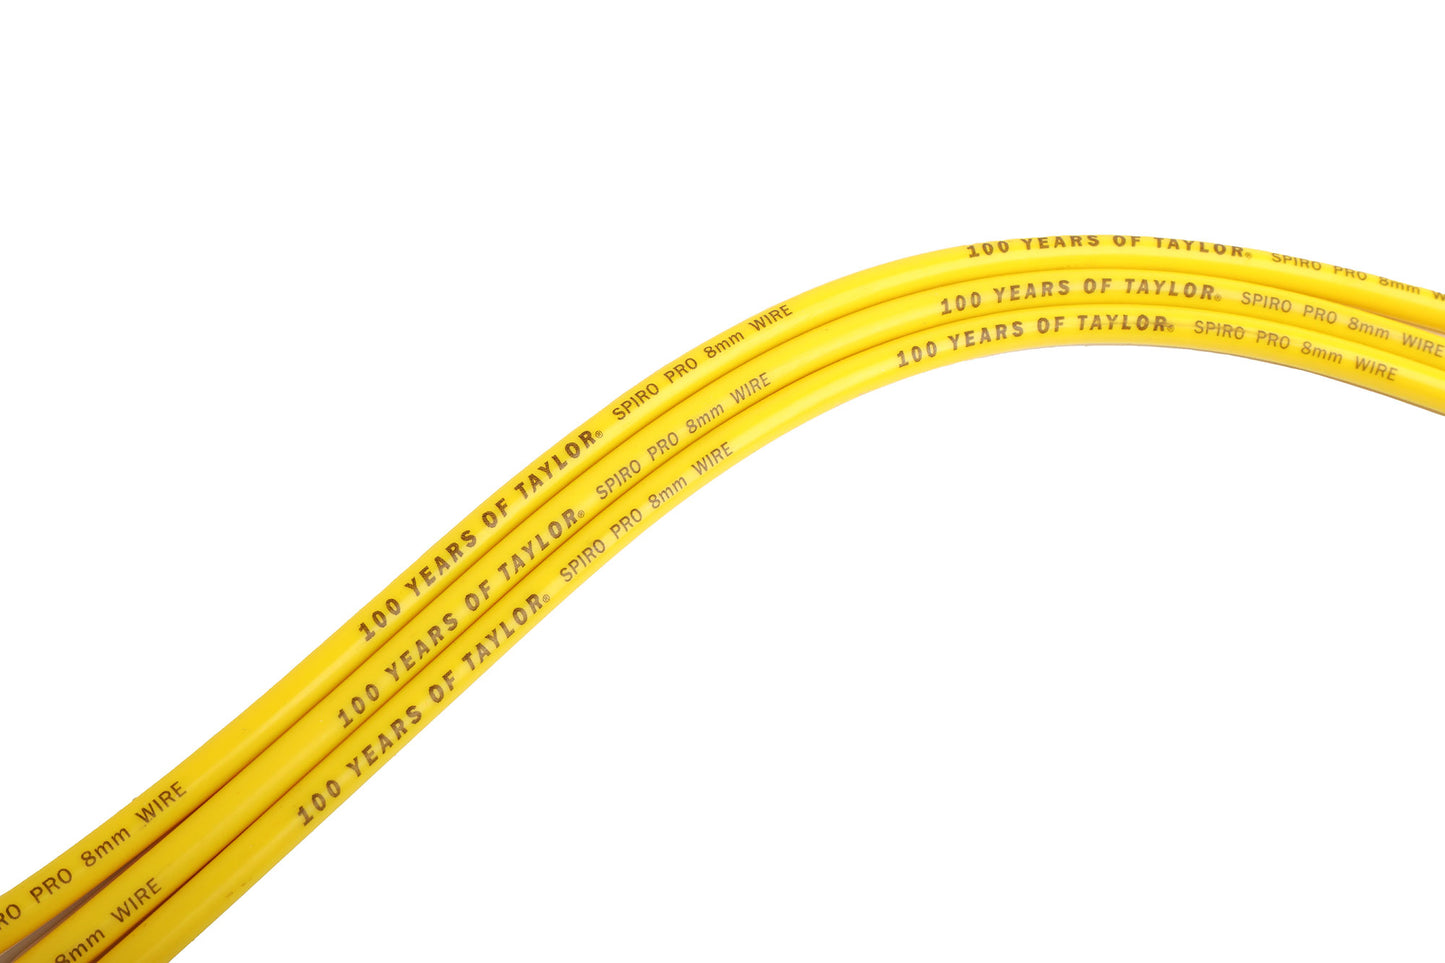 Taylor Cable 73451-YR100 8mm Spiro-Pro univ 8 cyl 90 Yellow/Black 100 Years